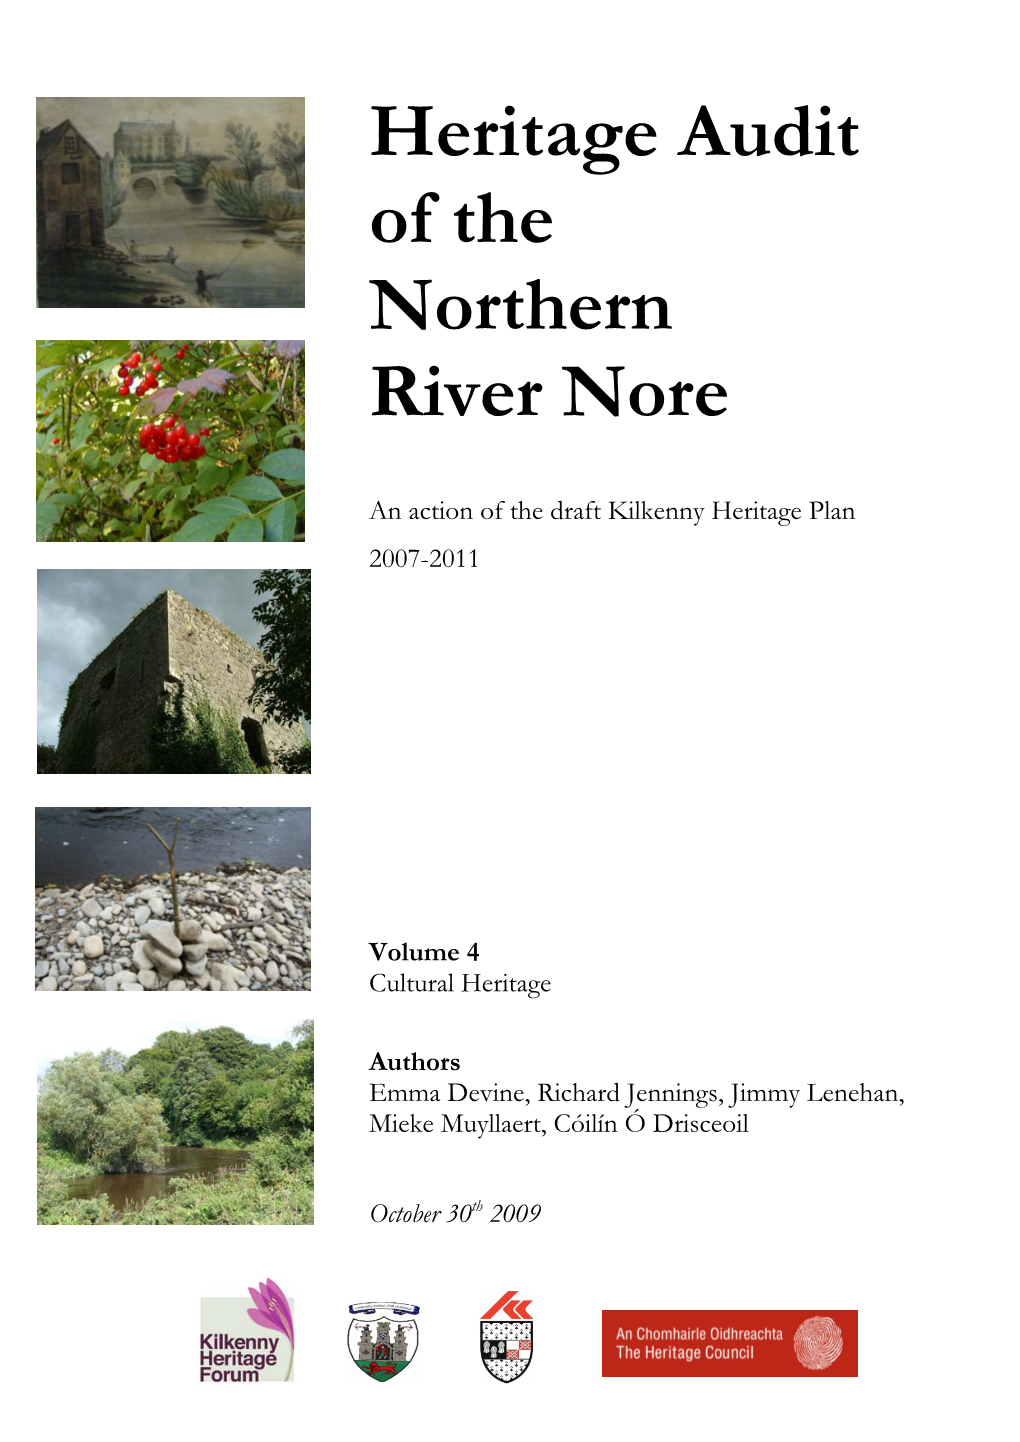 Heritage Audit of the Northern River Nore